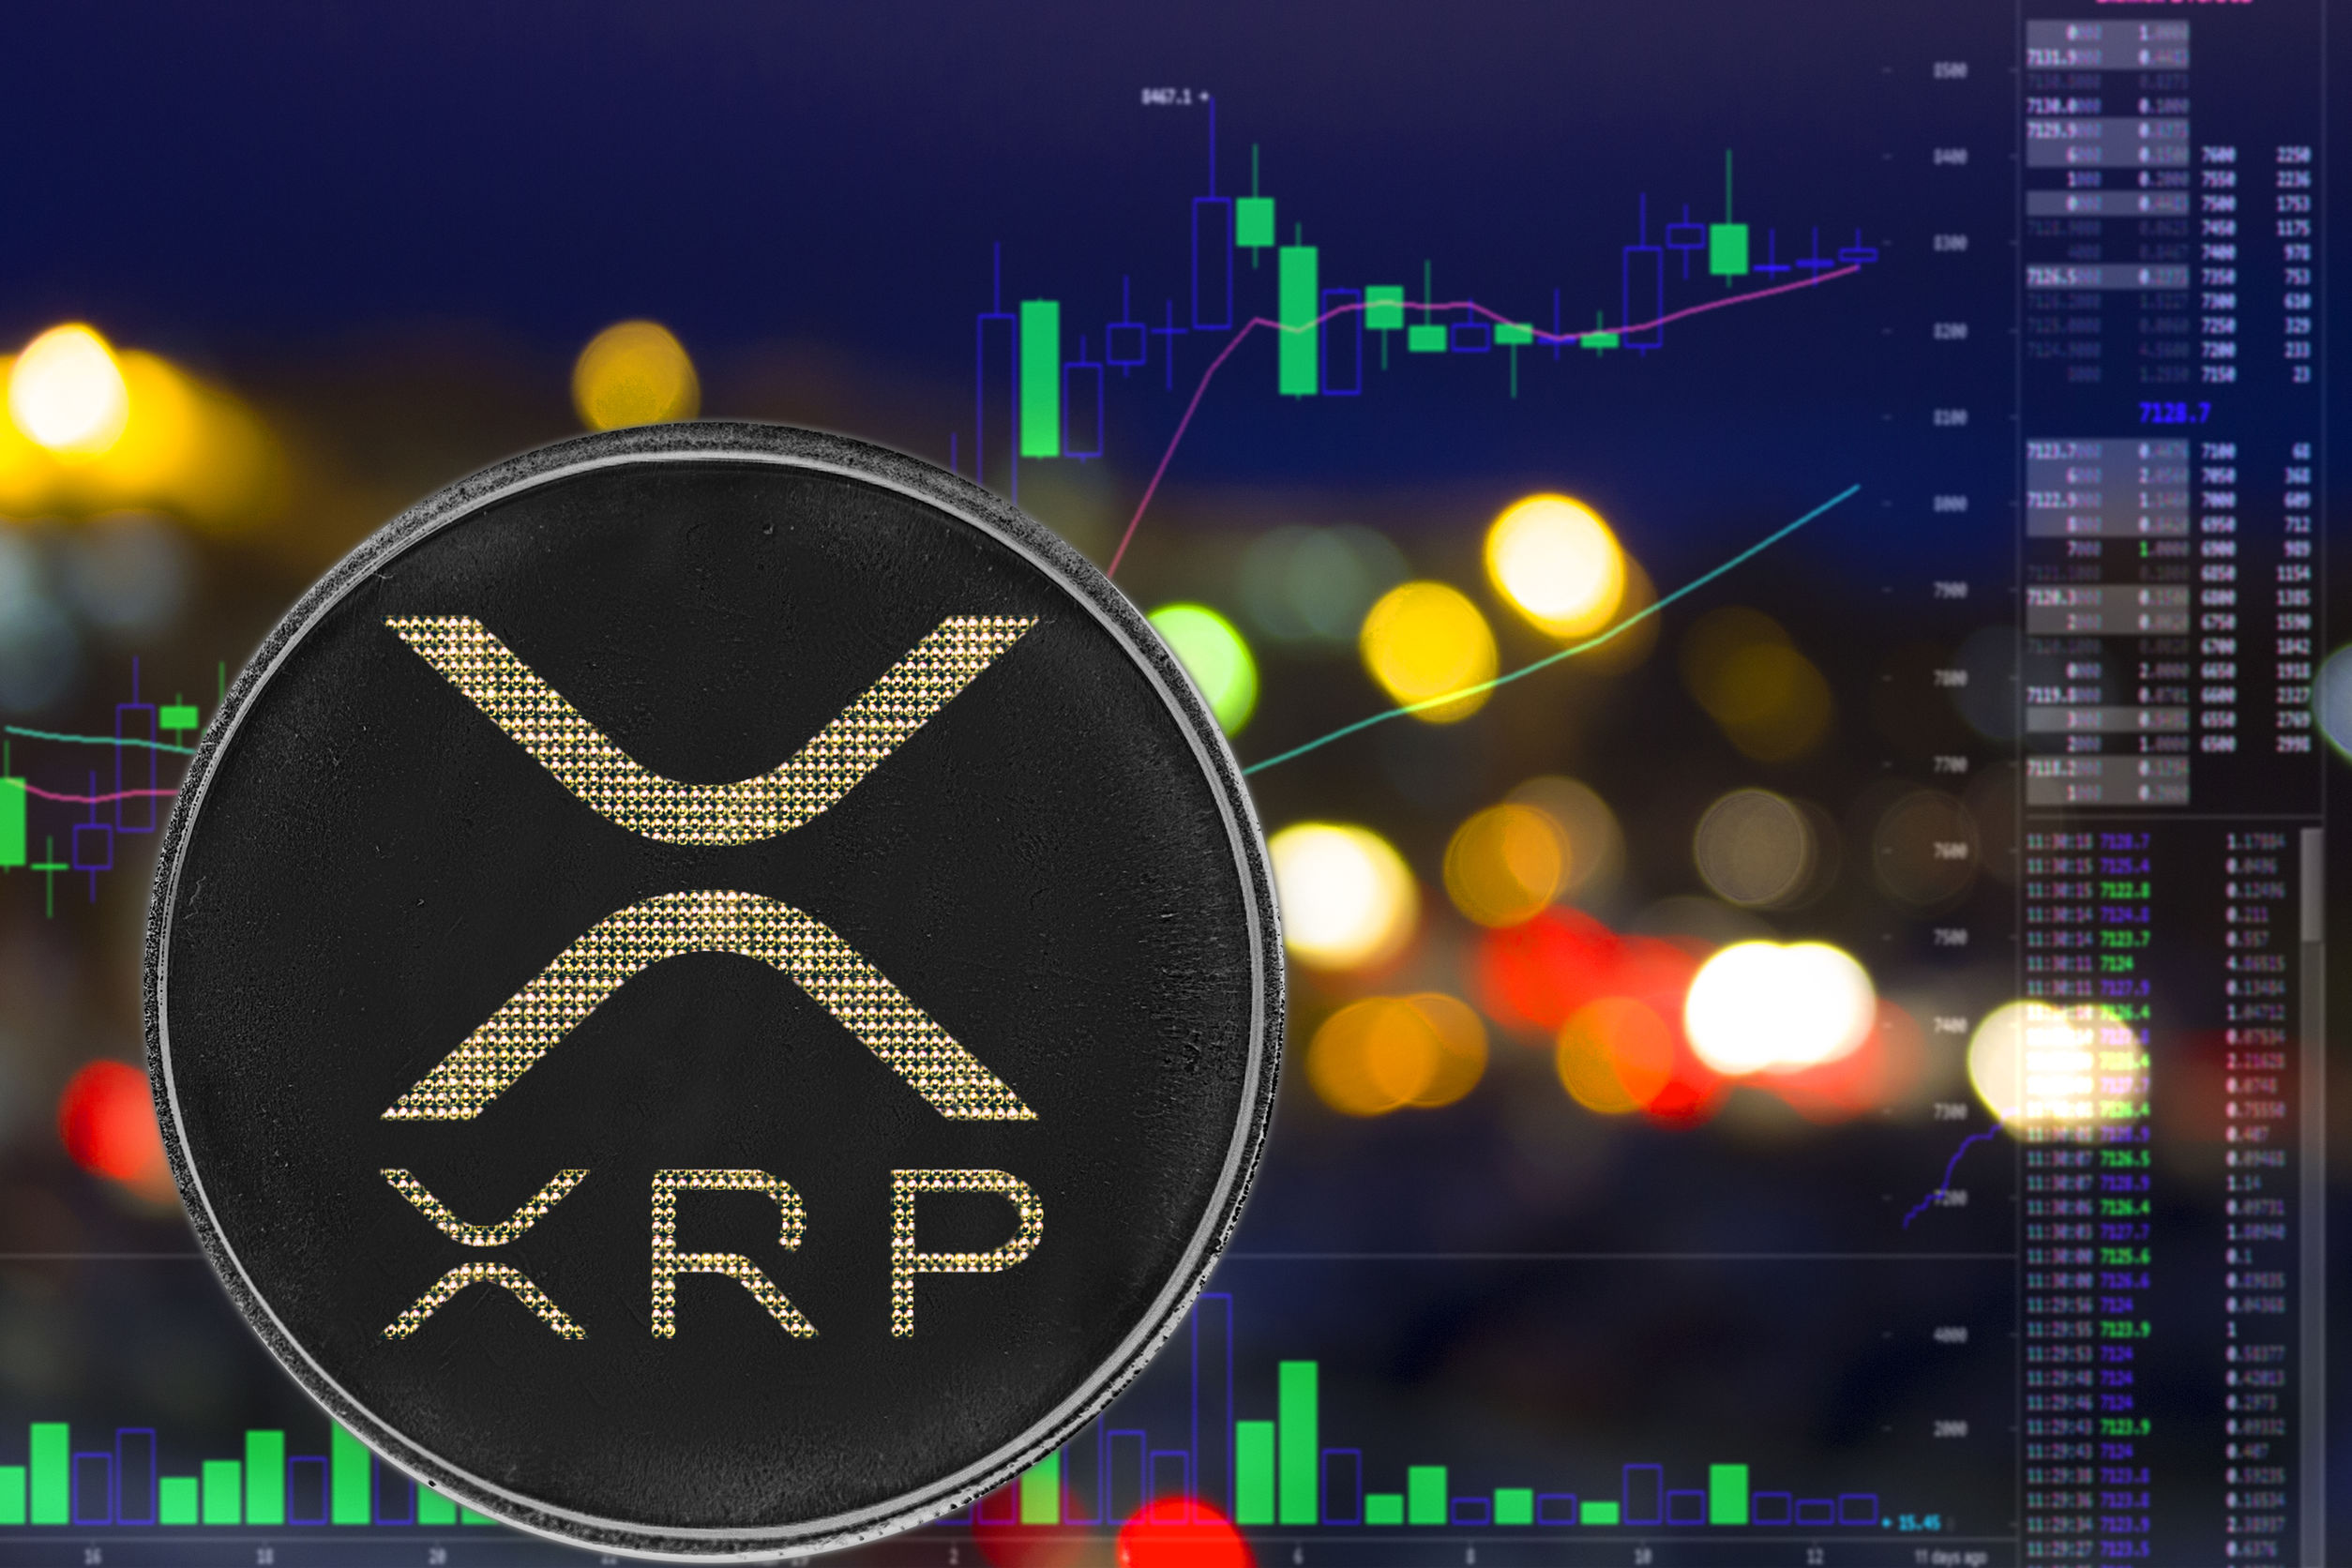 Here are 3 reasons why the price of Ripple XRP is poised for a gigantic explosion